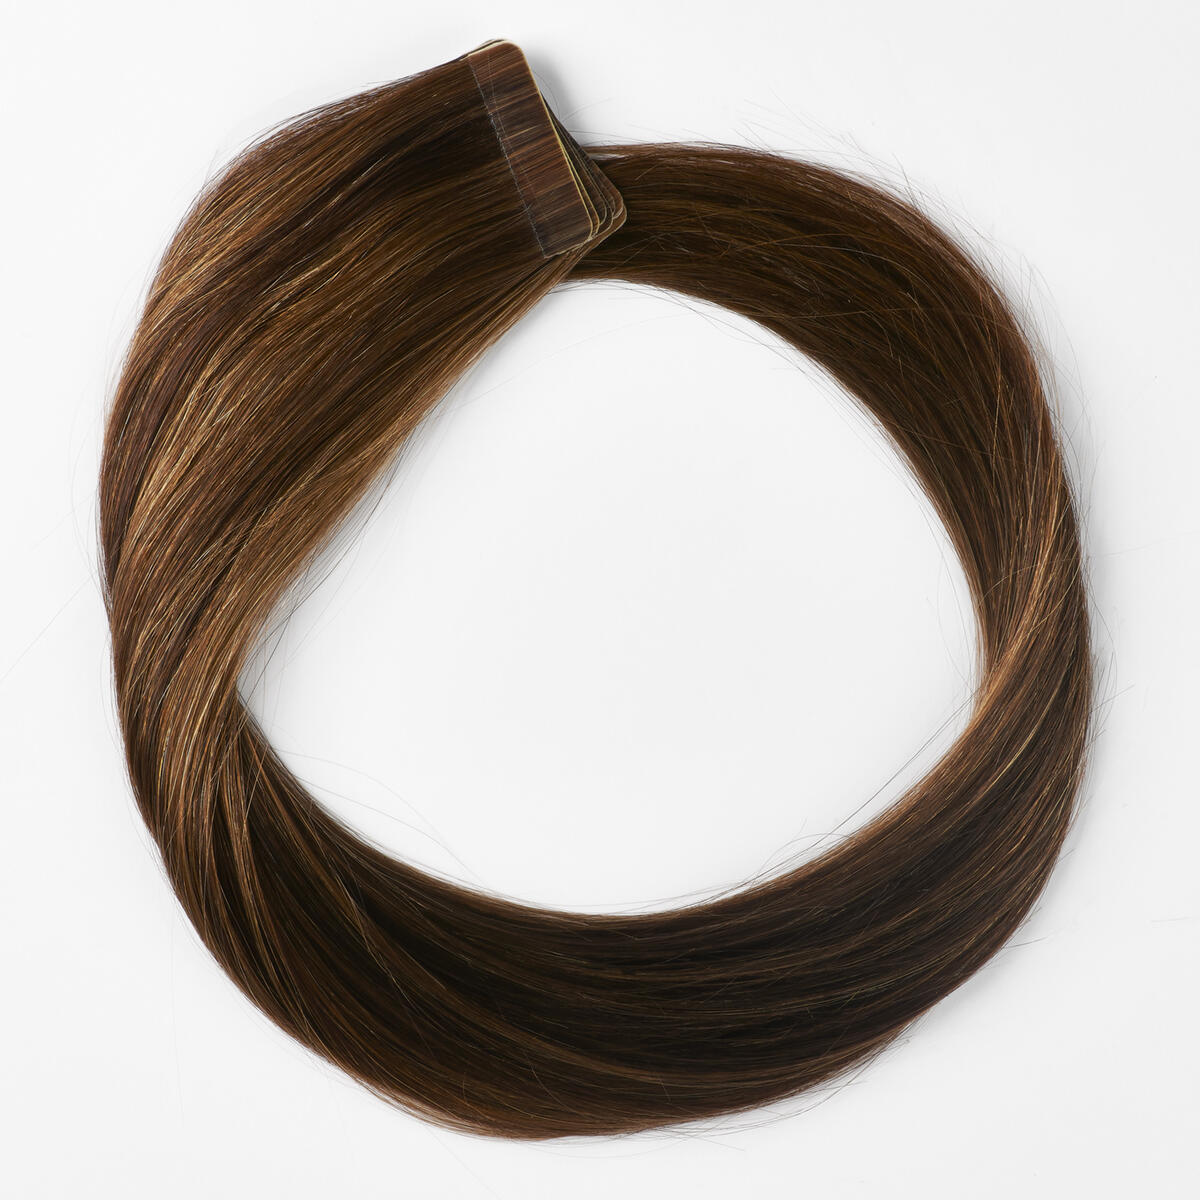 Basic Tape Extensions Classic 4y M2.3/5.0 Chocolate Mix 30 cm